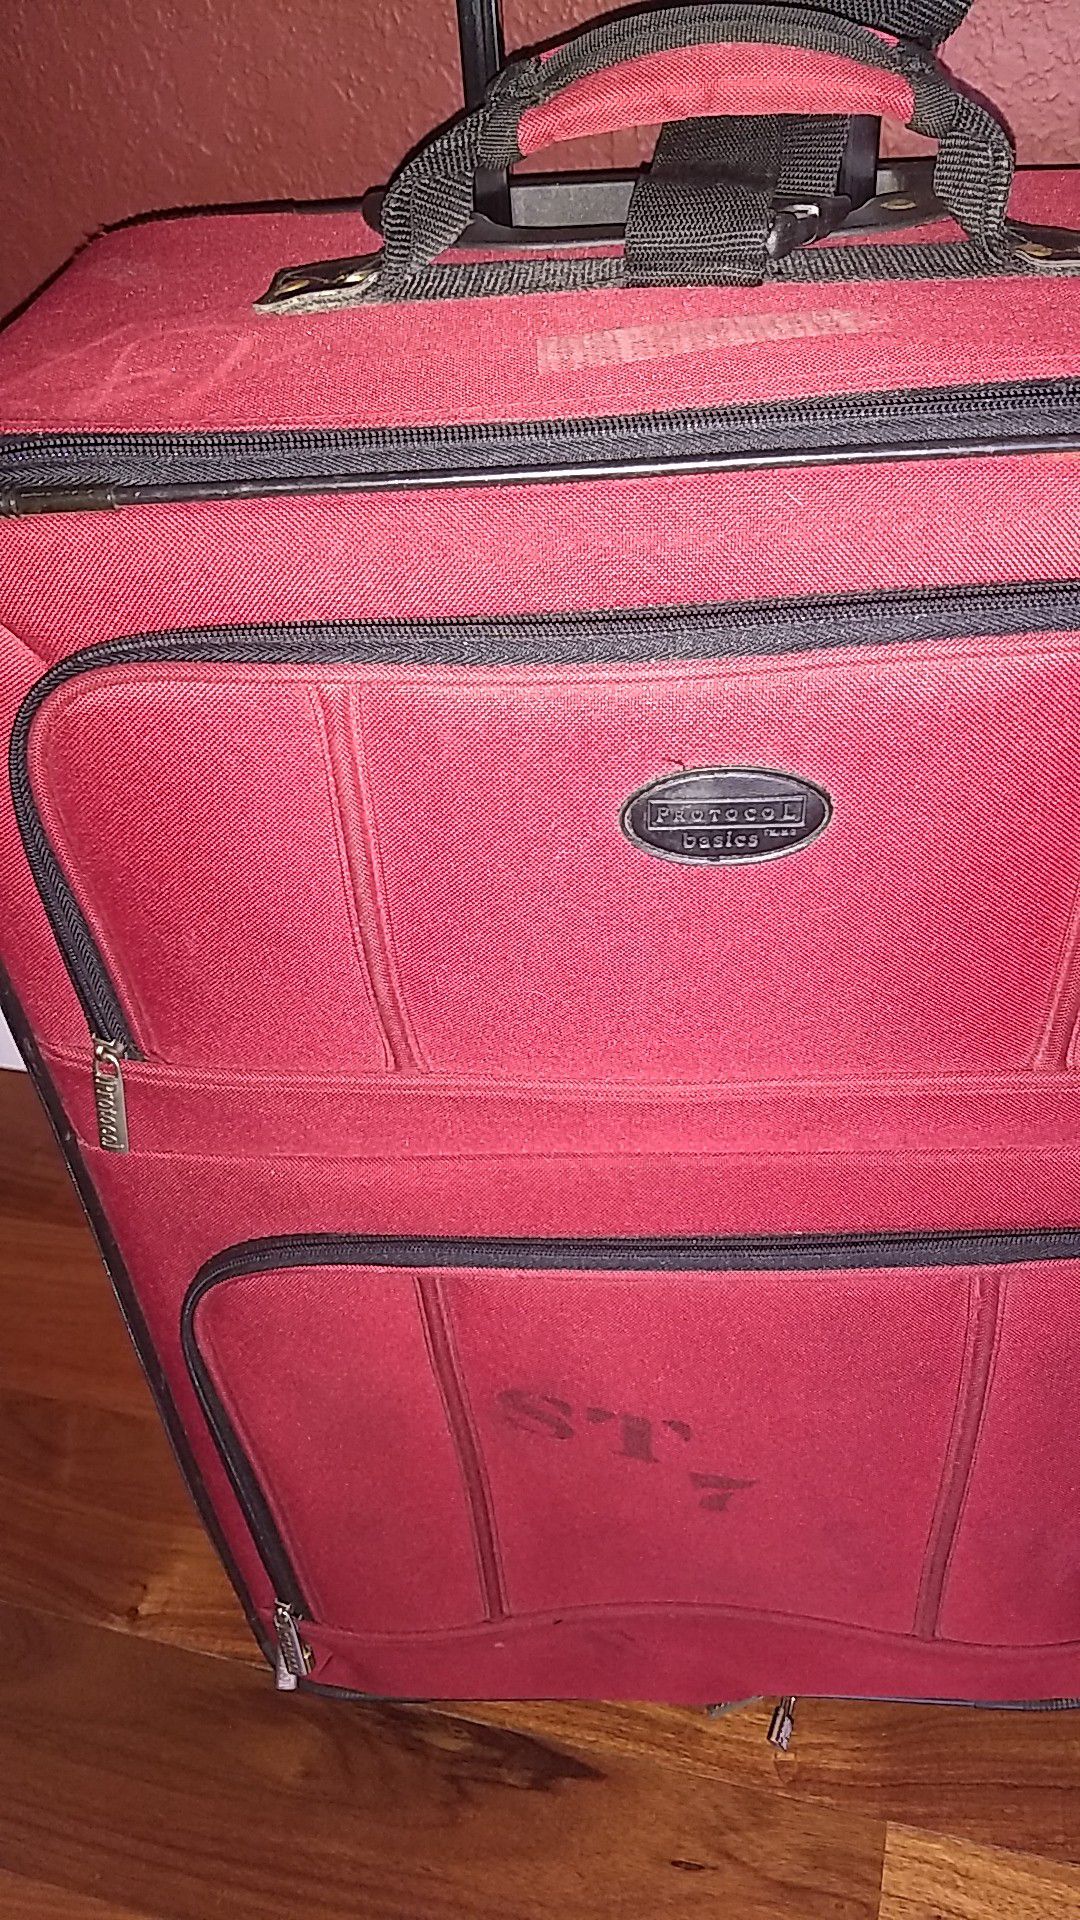 Red, rolling suitcase